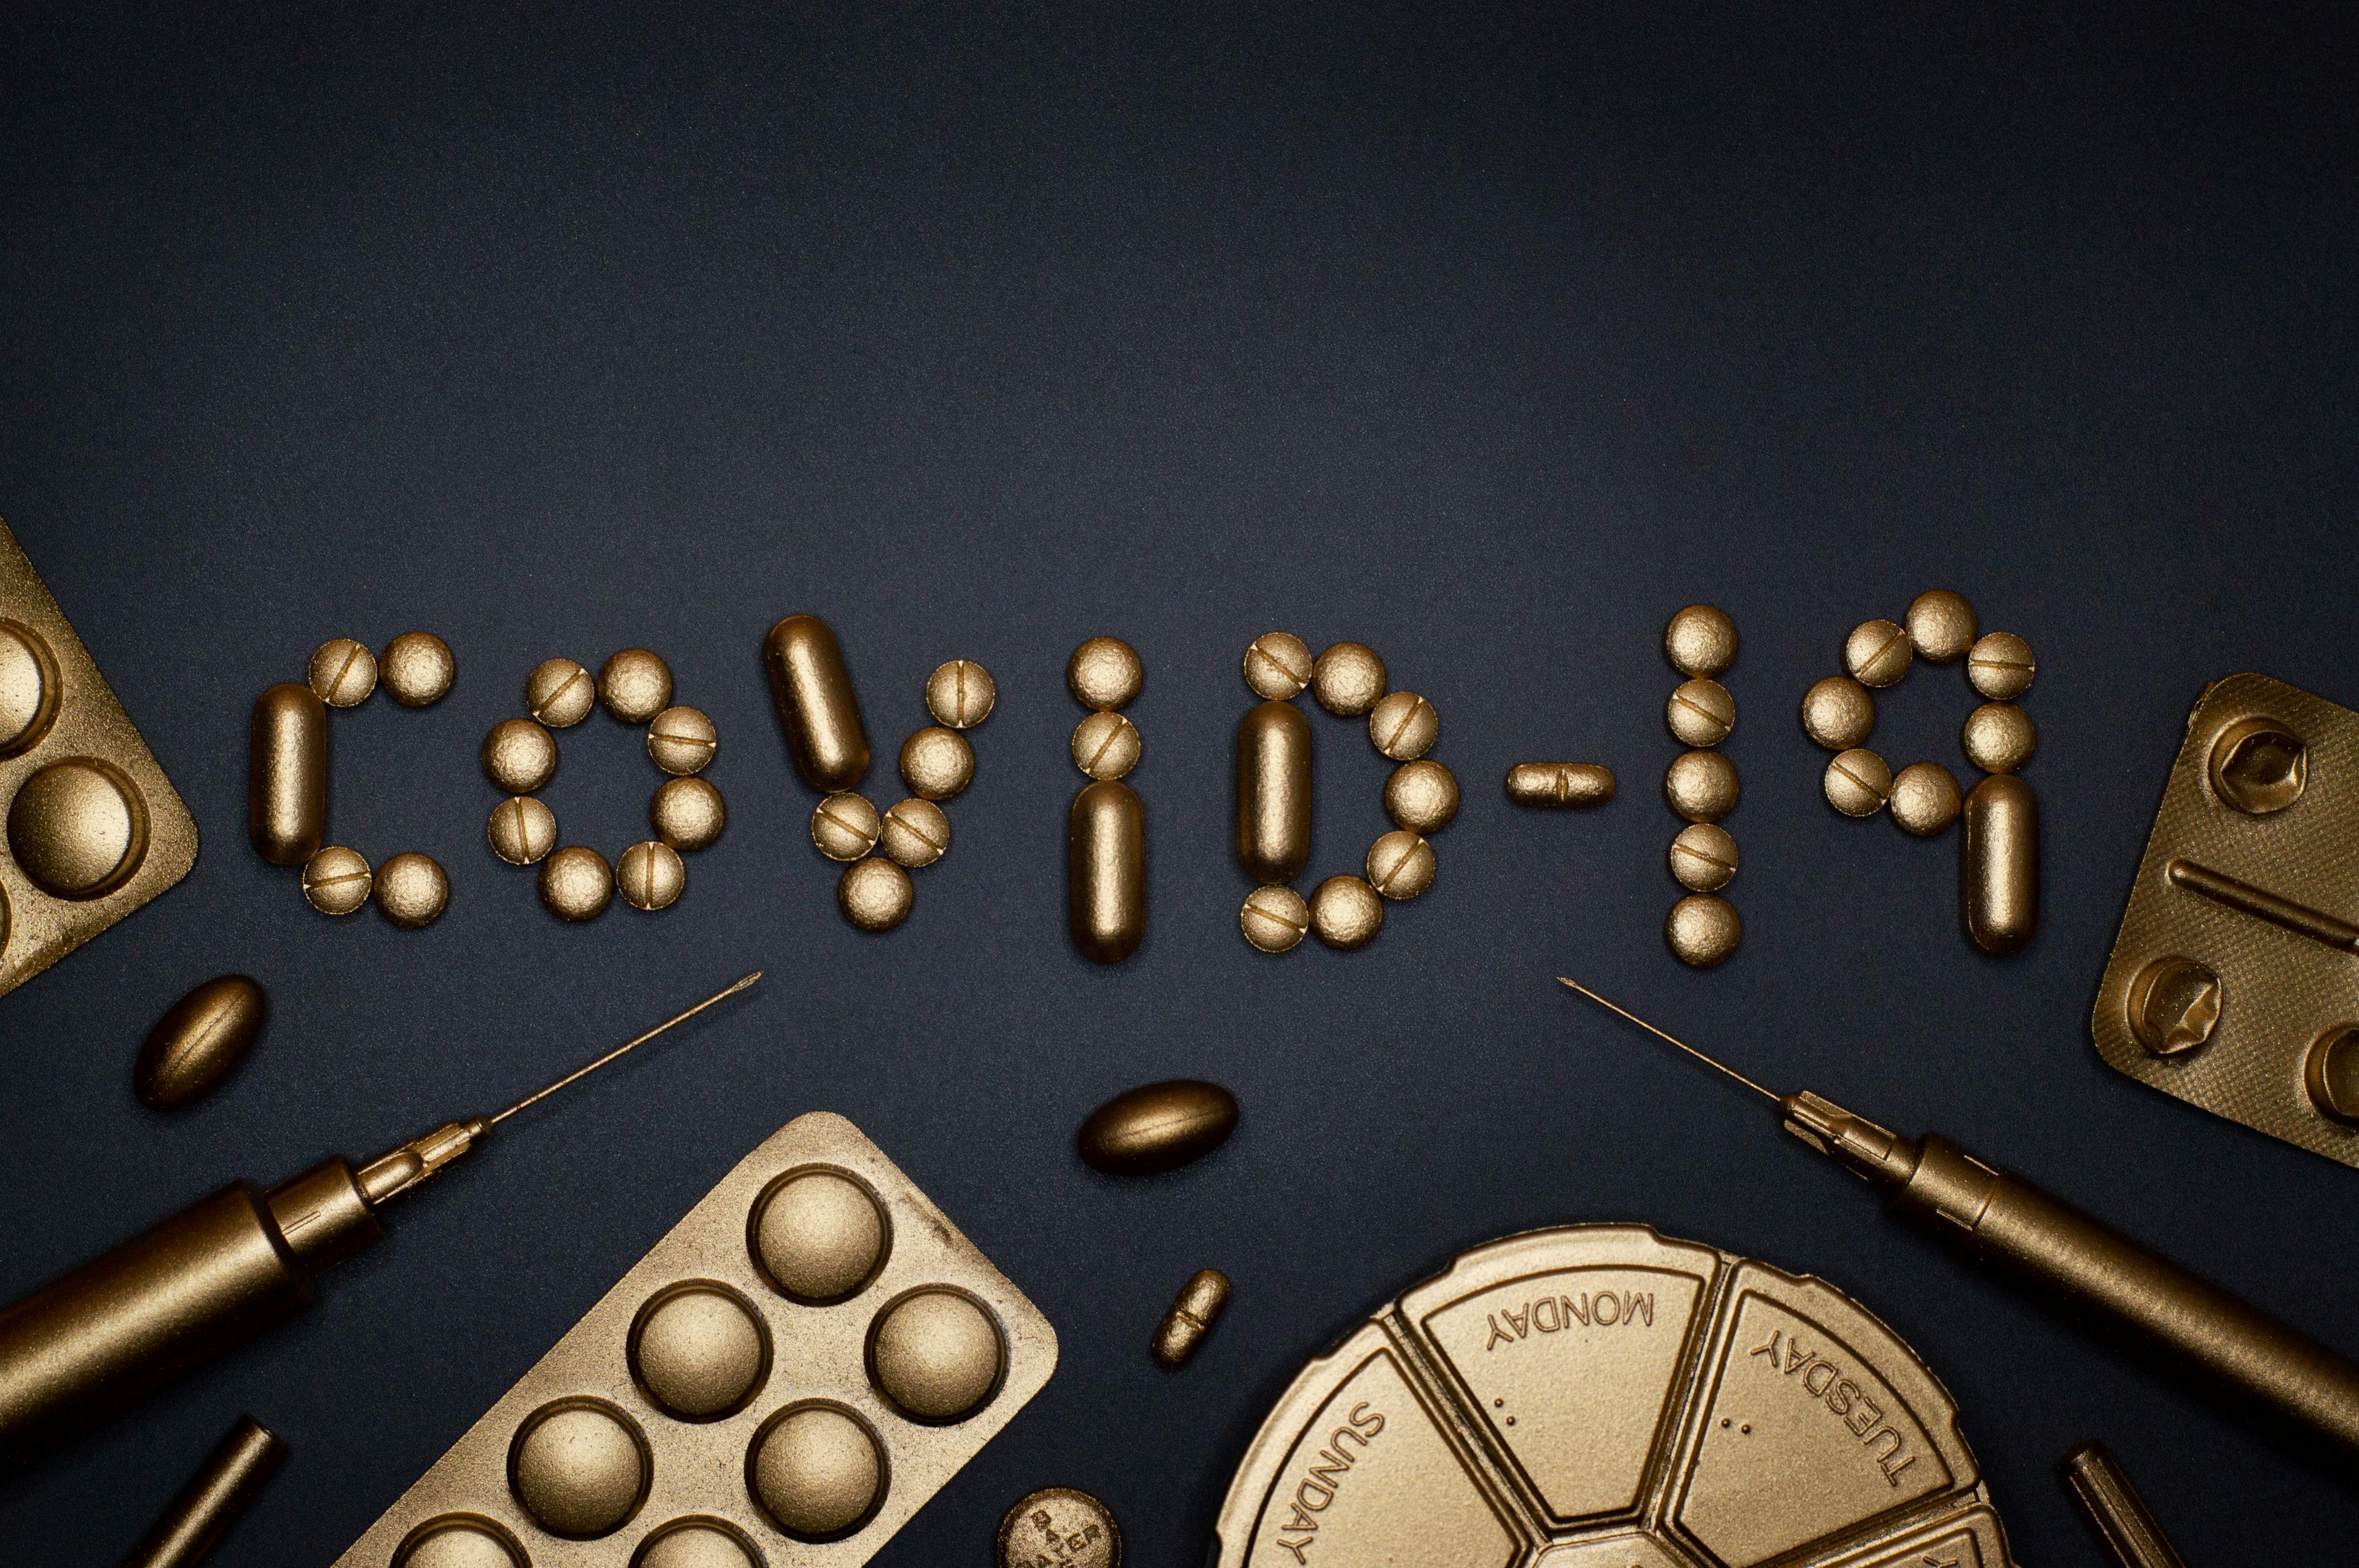 "COVID-19" written in various pills surrounded by different kinds of medications